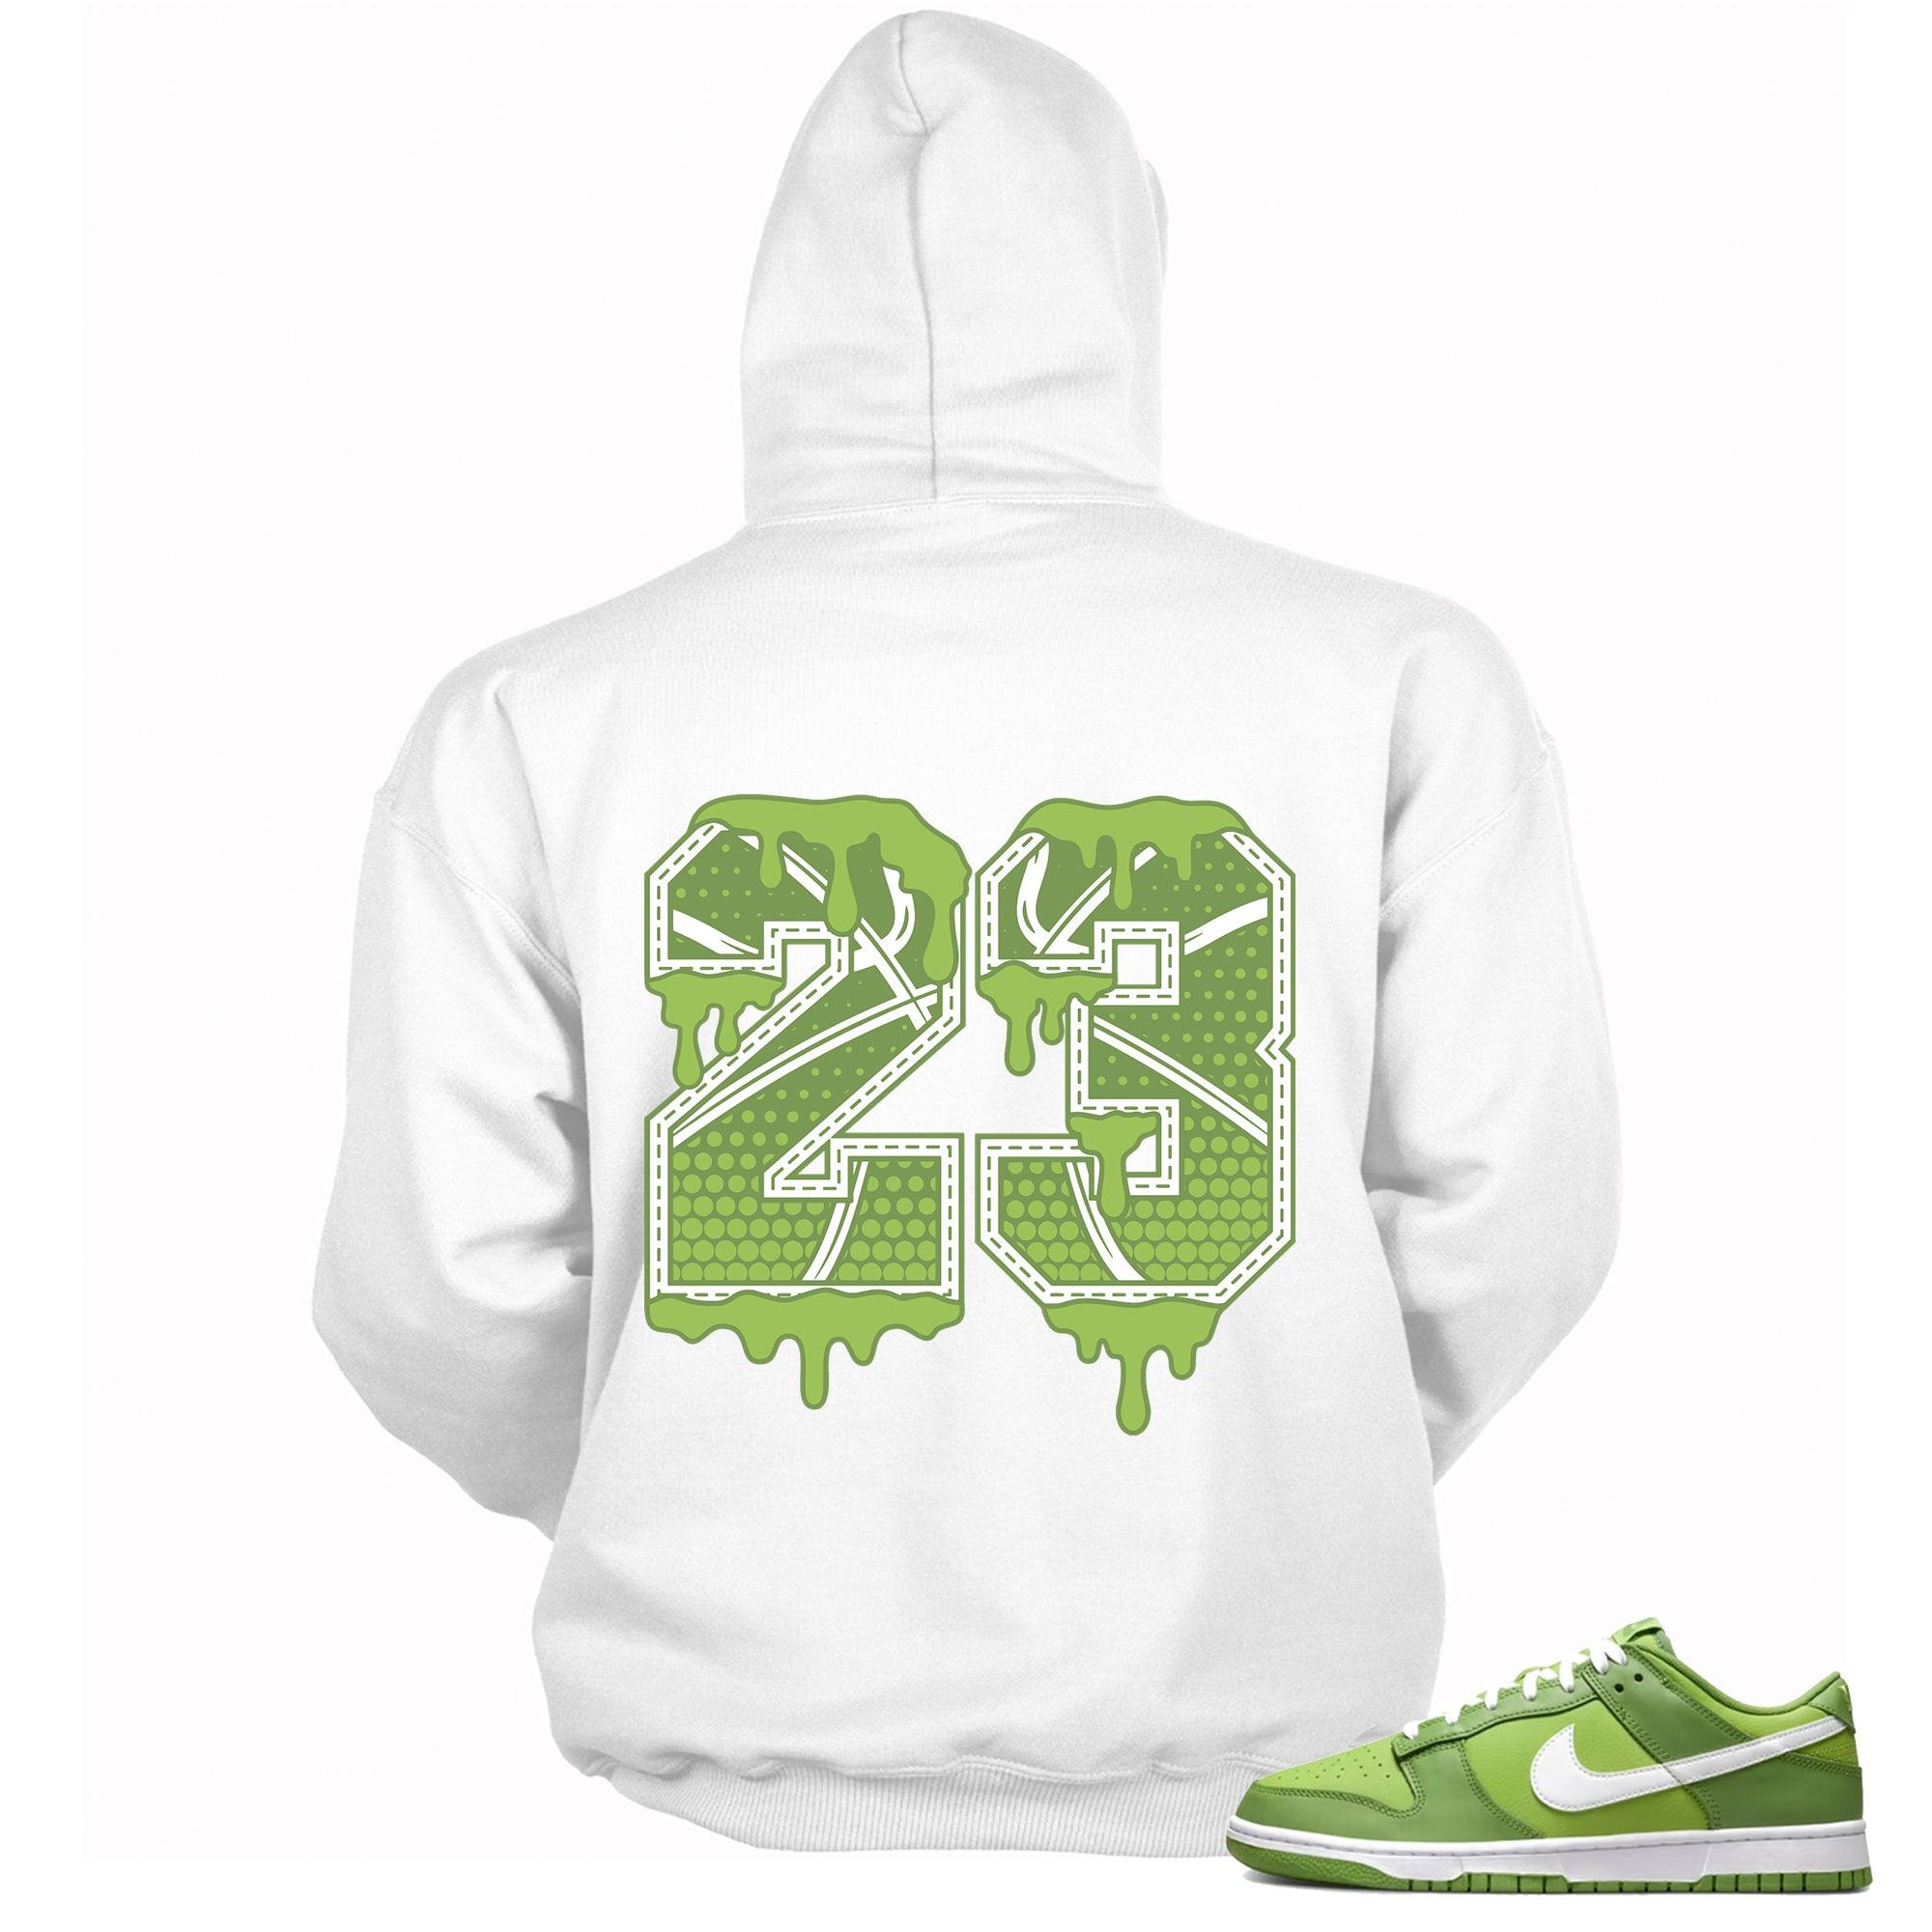 Number 23 Ball Hoodie Nike Dunk Low Chlorophyll photo